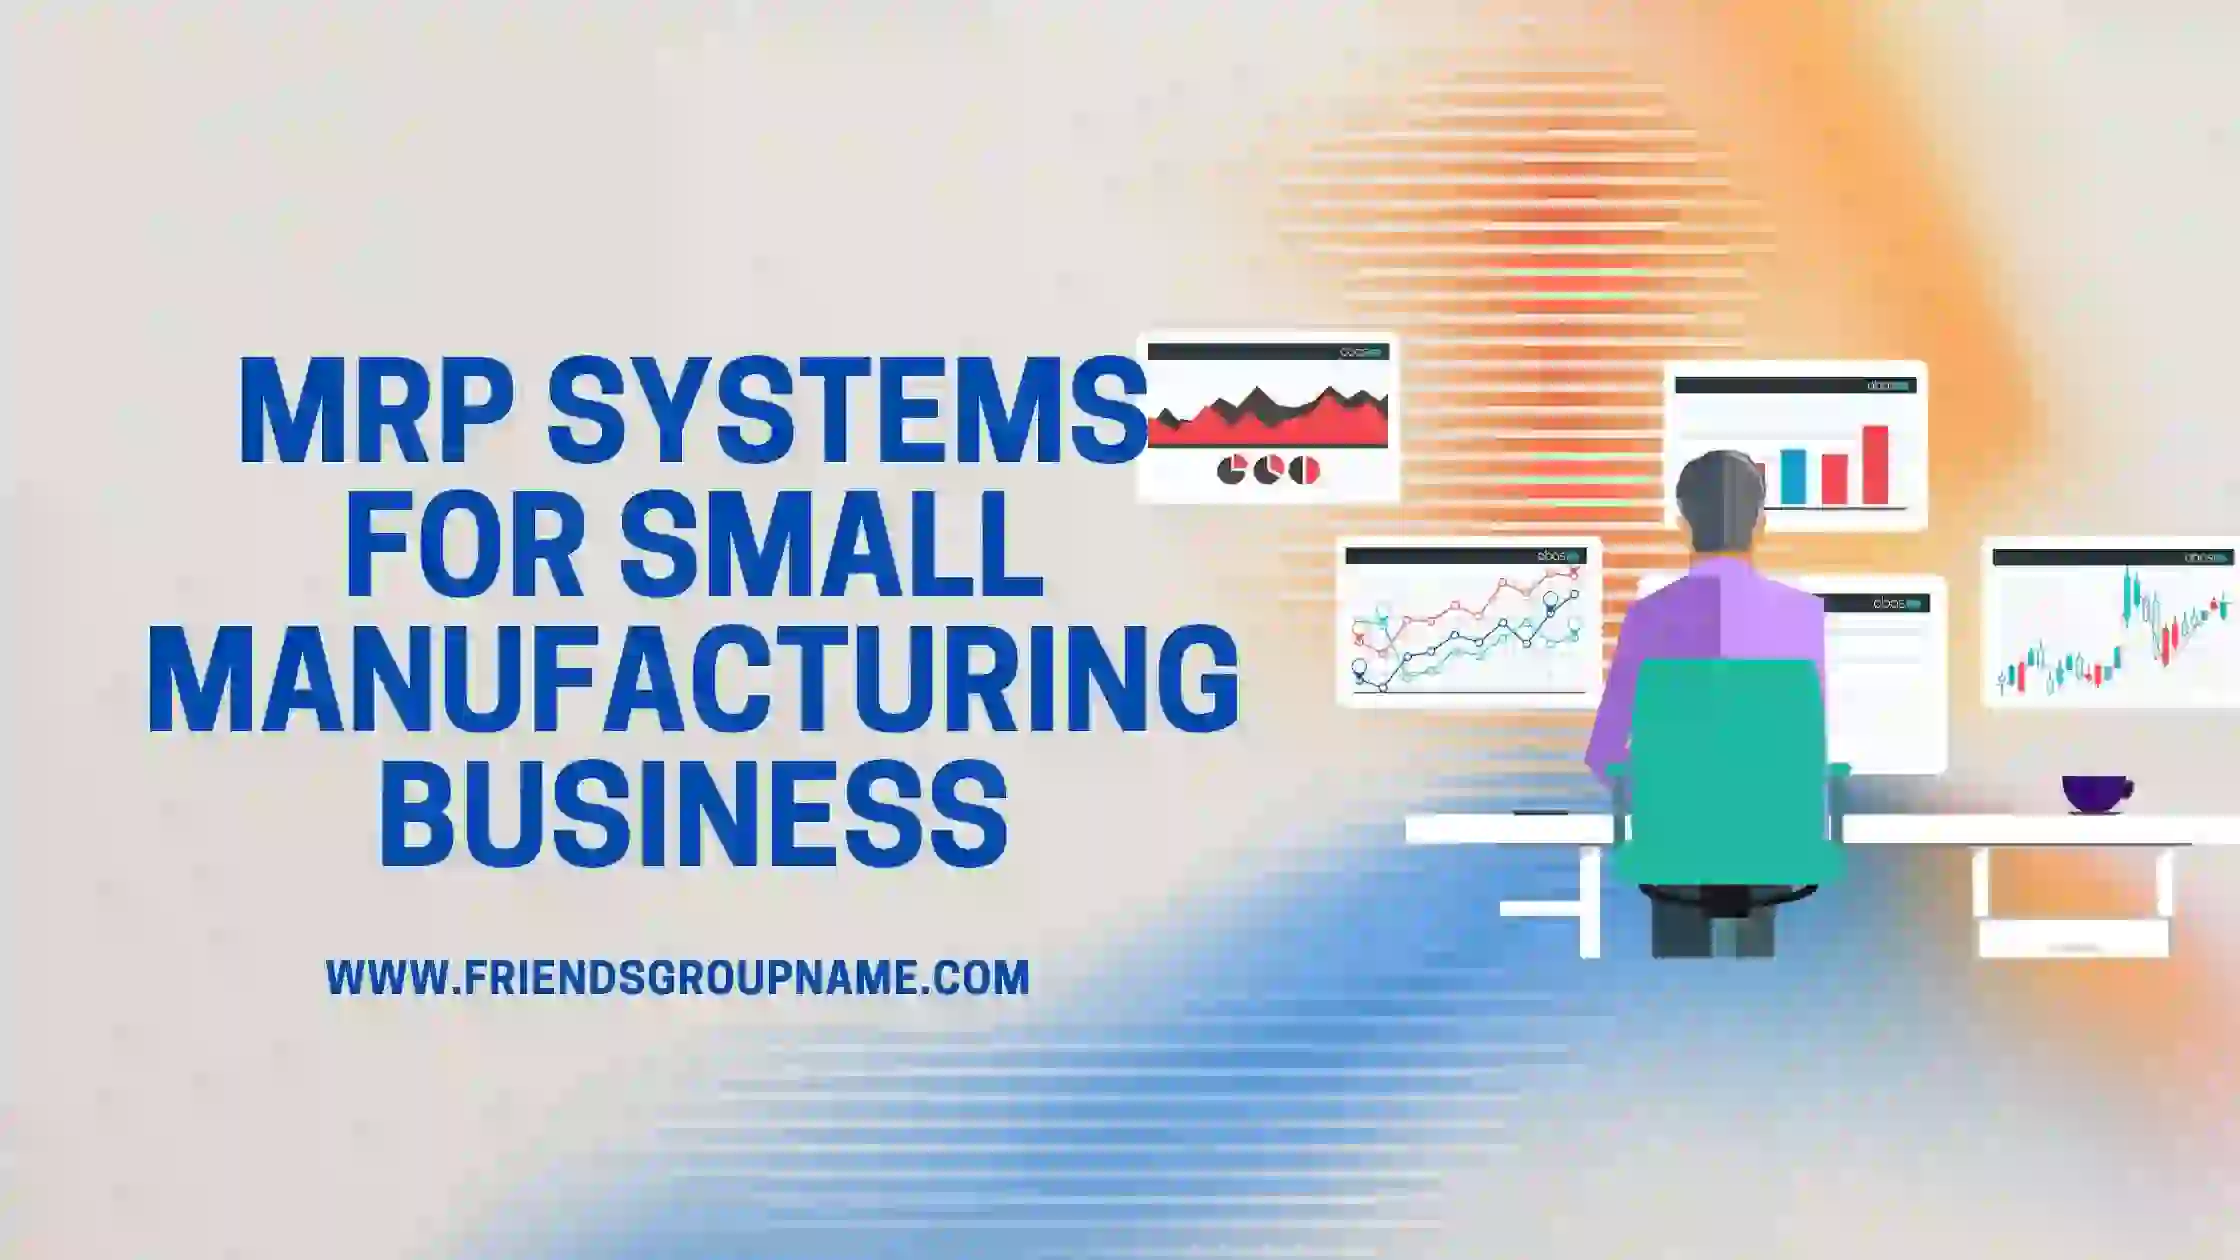 MRP Systems For Small Manufacturing Business